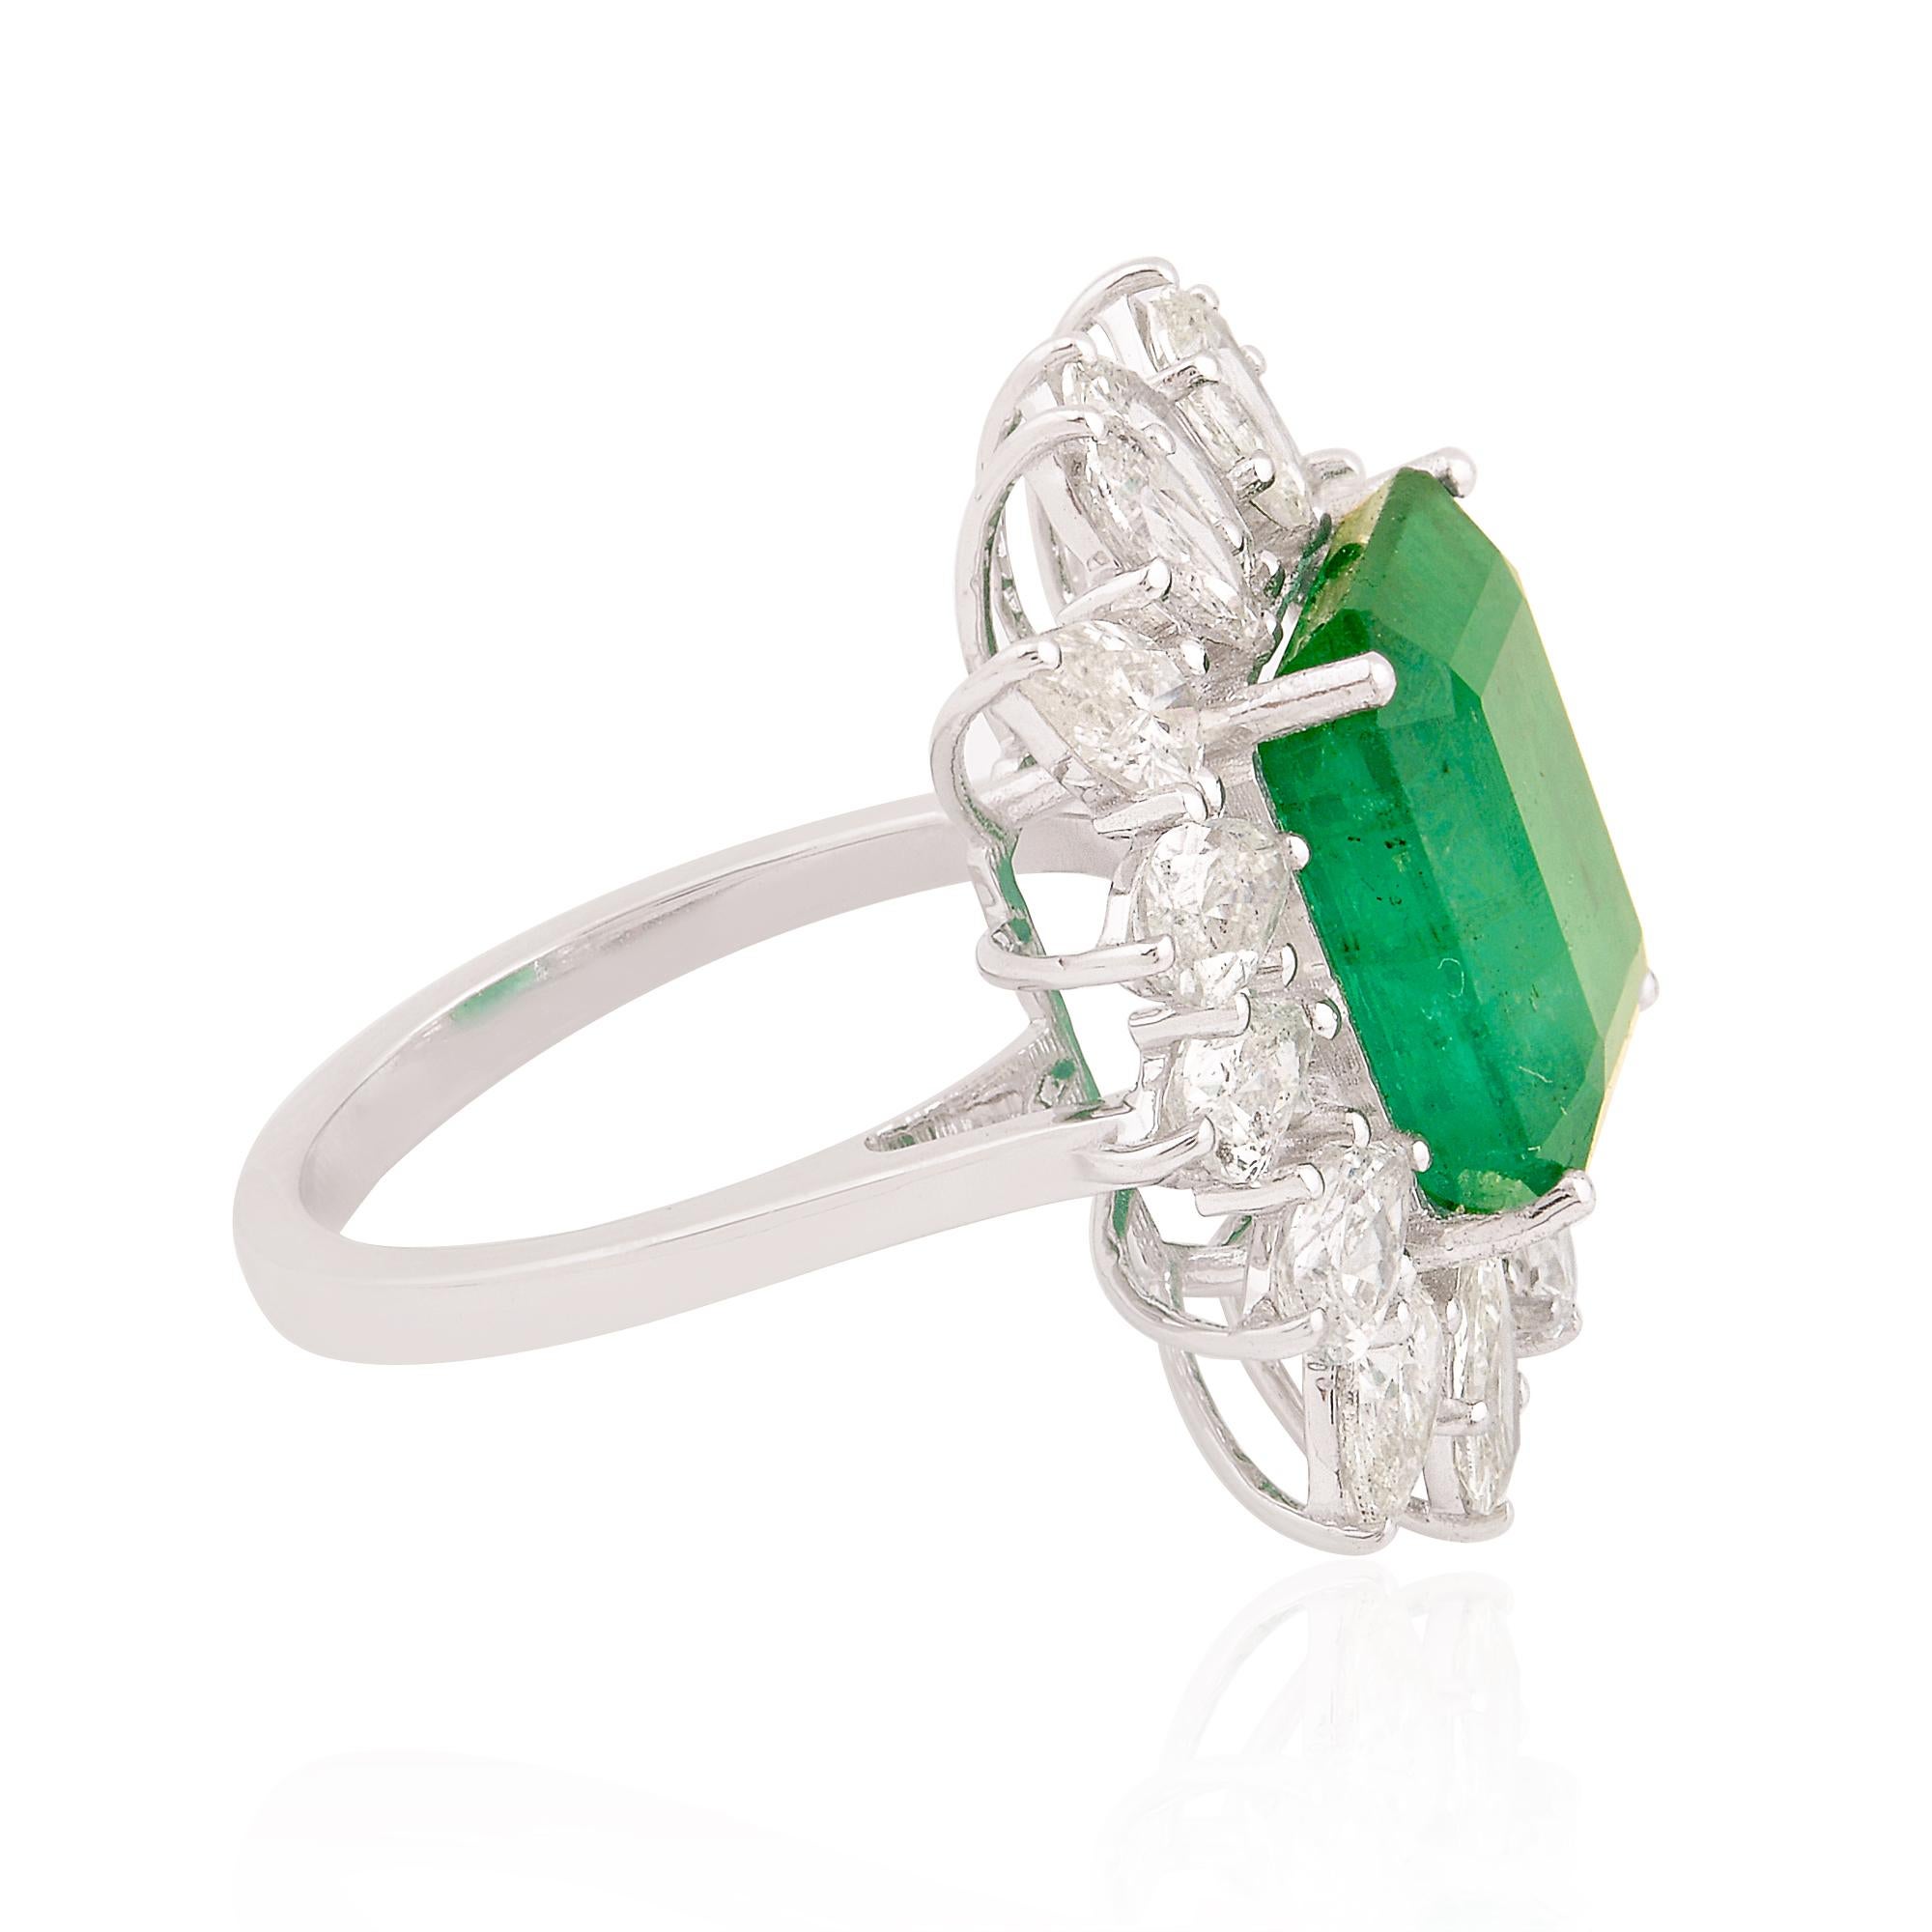 For Sale:  Zambian Emerald Cocktail Ring Pear Diamond Solid 18k White Gold Fine Jewelry 2